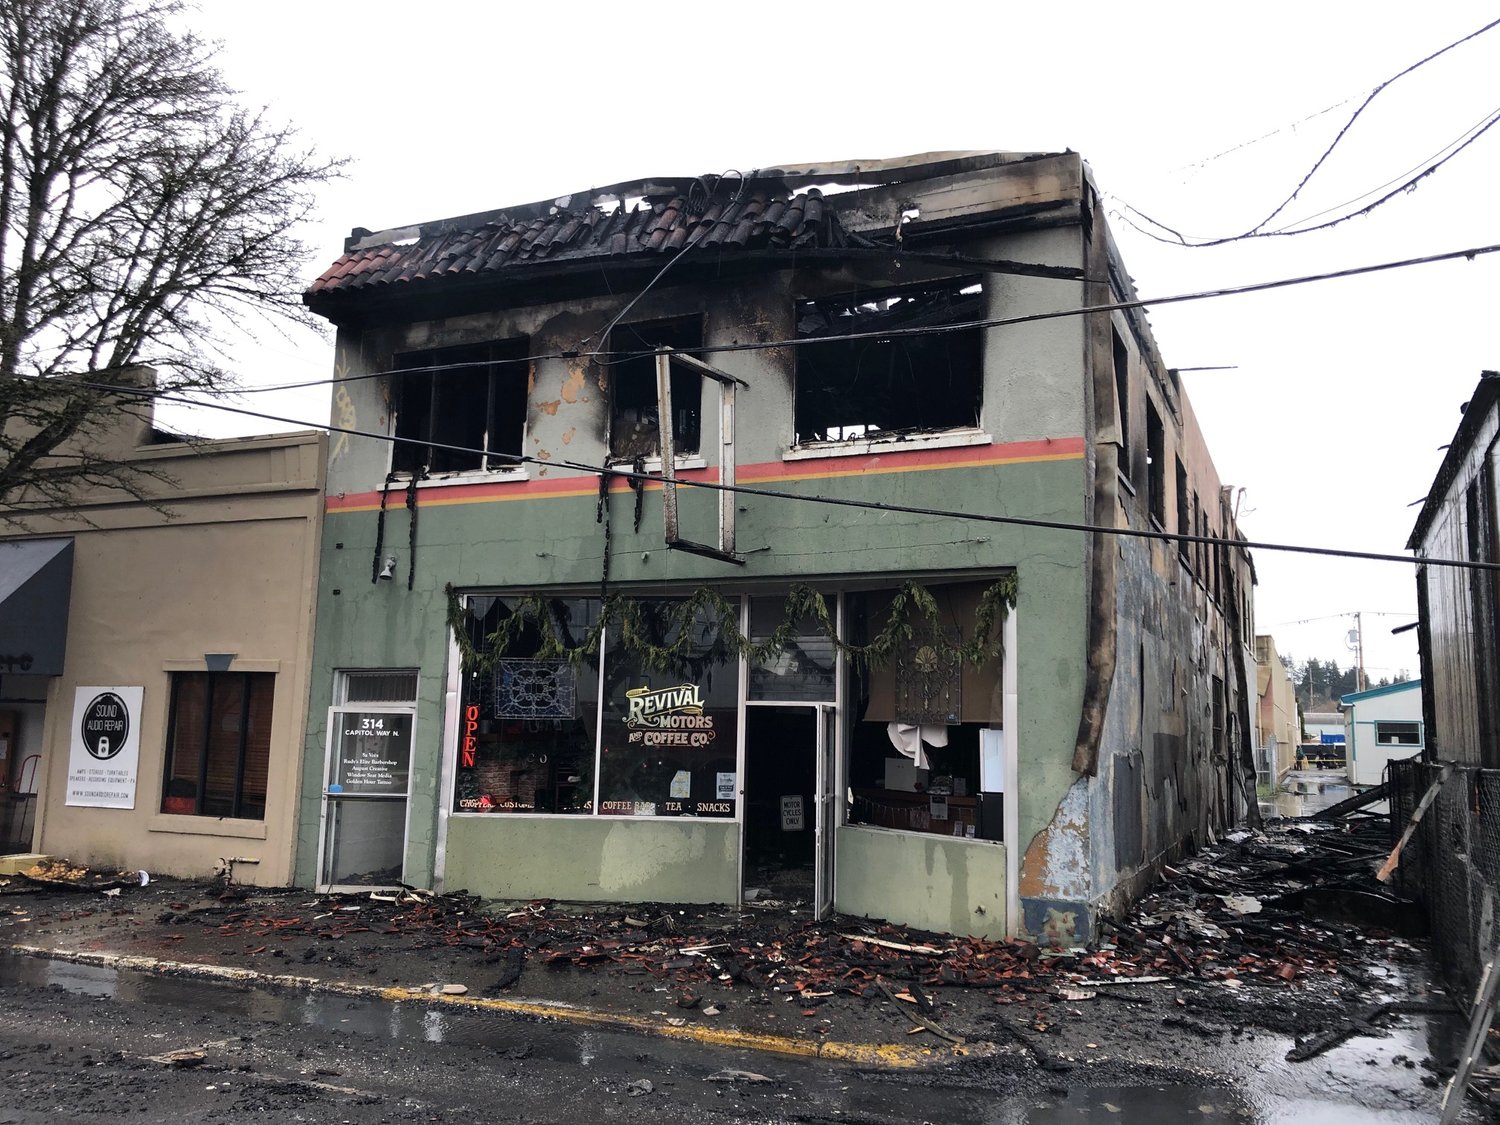 Revival Motors & Coffee Co. was destroyed in the fire, along with an apartment and five other businesses housed at 314 Capitol Way N.